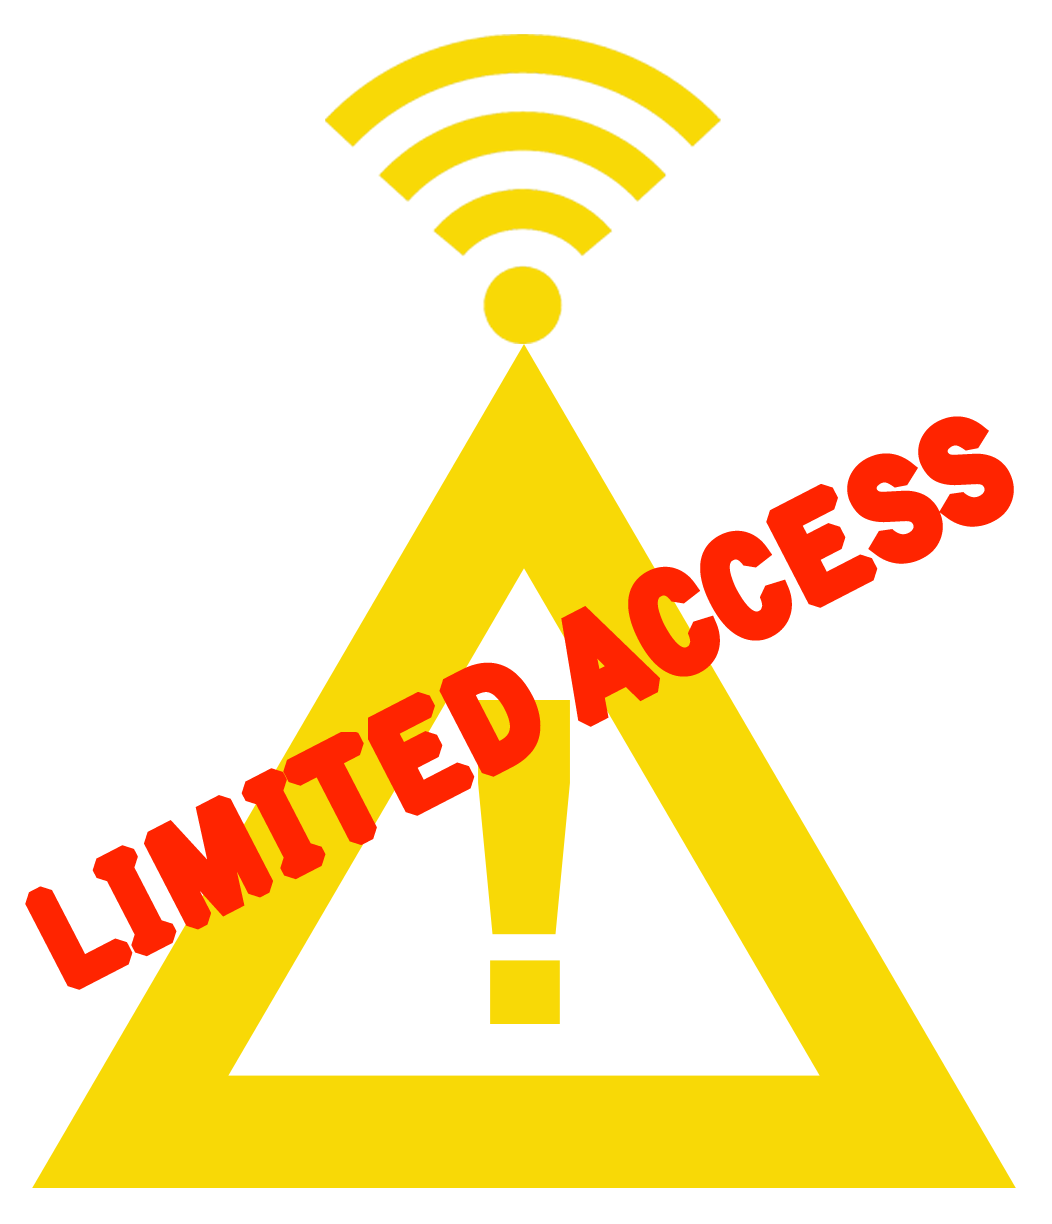 Protected access